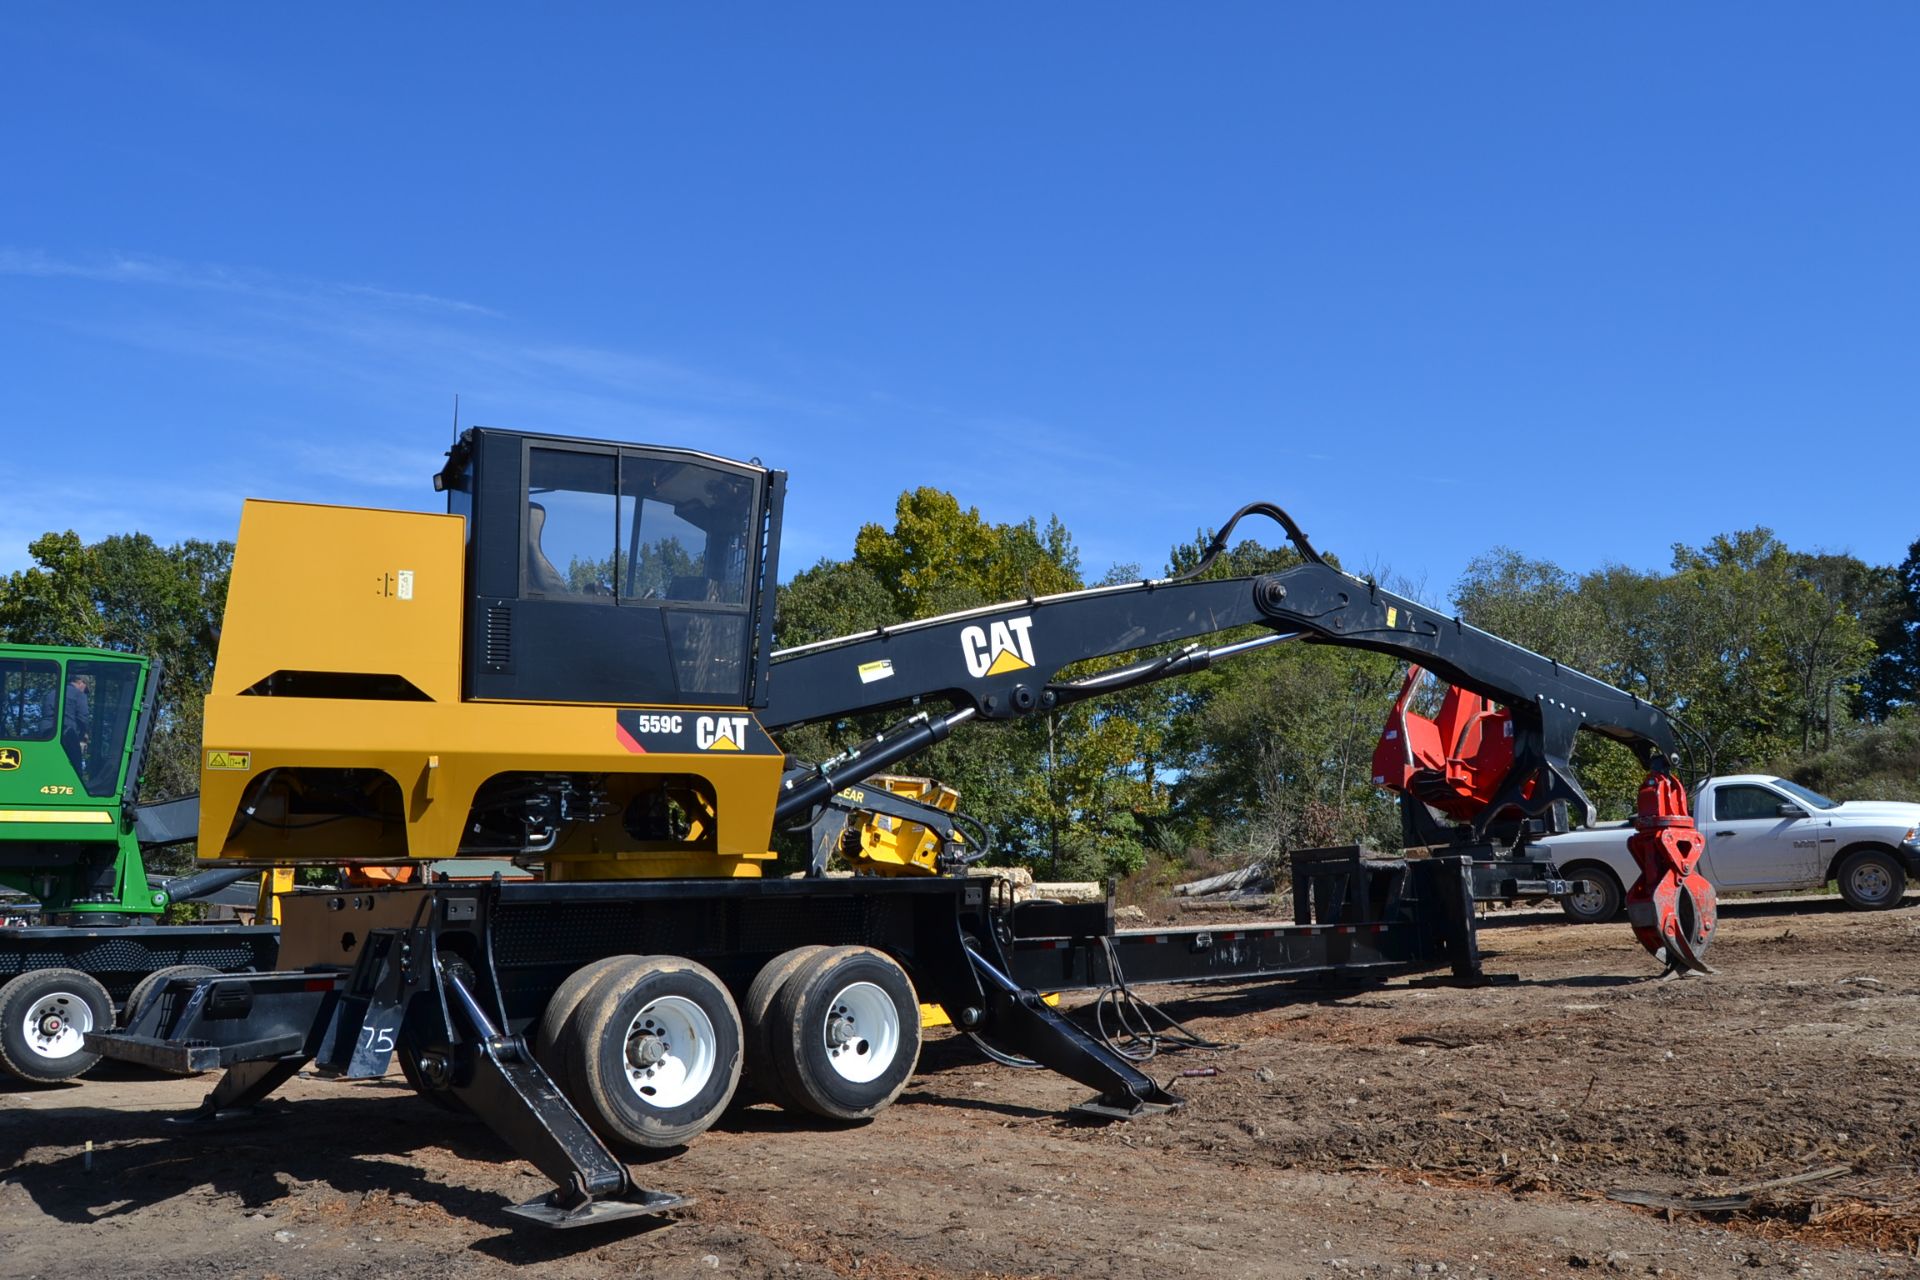 CAT 559C KNUCKLE BOOM LOADER W/ CONTINUOUS GRAPPLE; W/JOY STICK CONTROLS; W/CAB -HEAT & AIR; W/SAW - Image 3 of 4